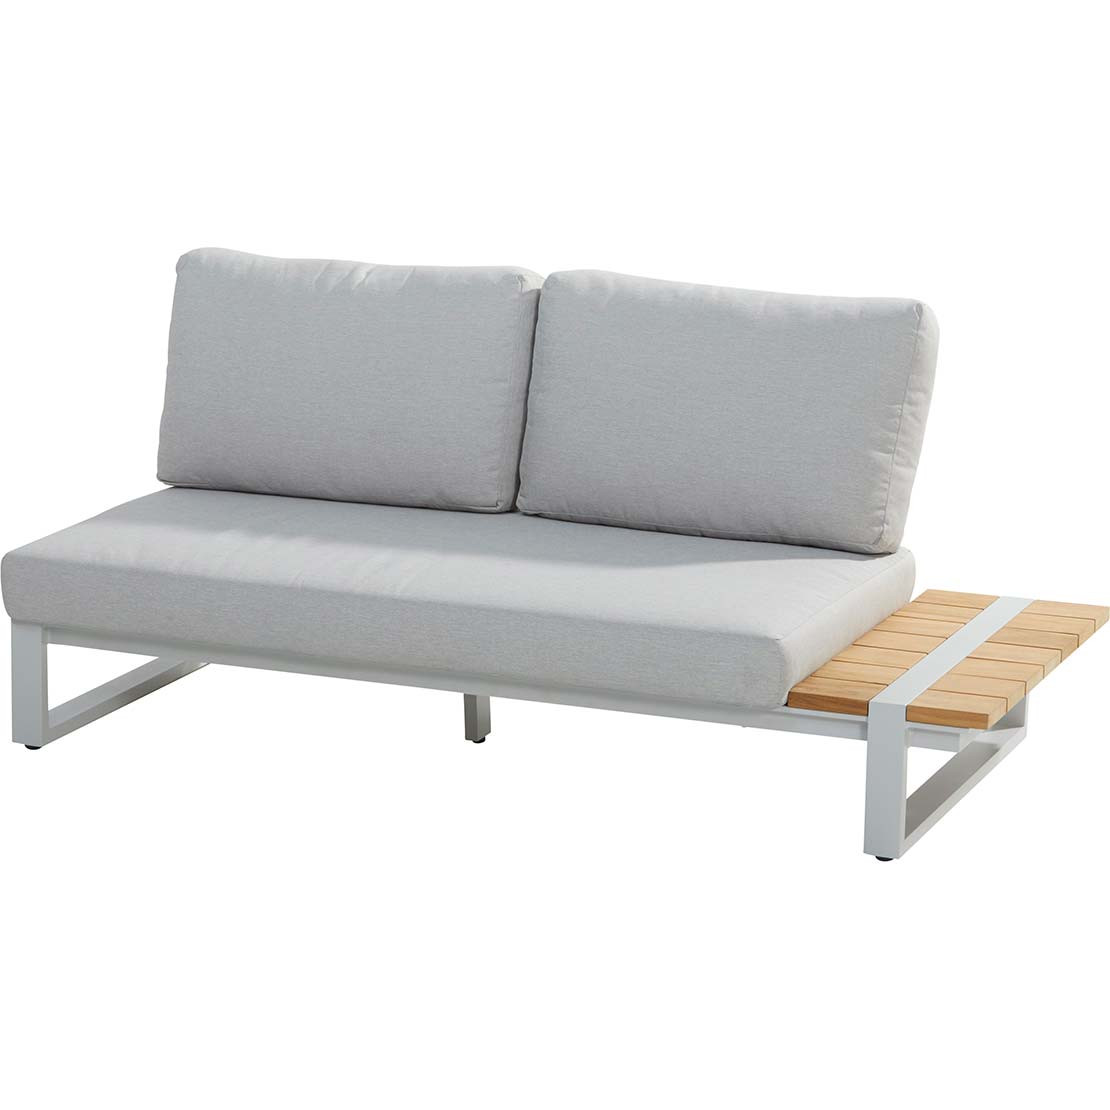 Country modular 2 seater LEFT/RIGHT teak table Frost Grey with 3 cushions